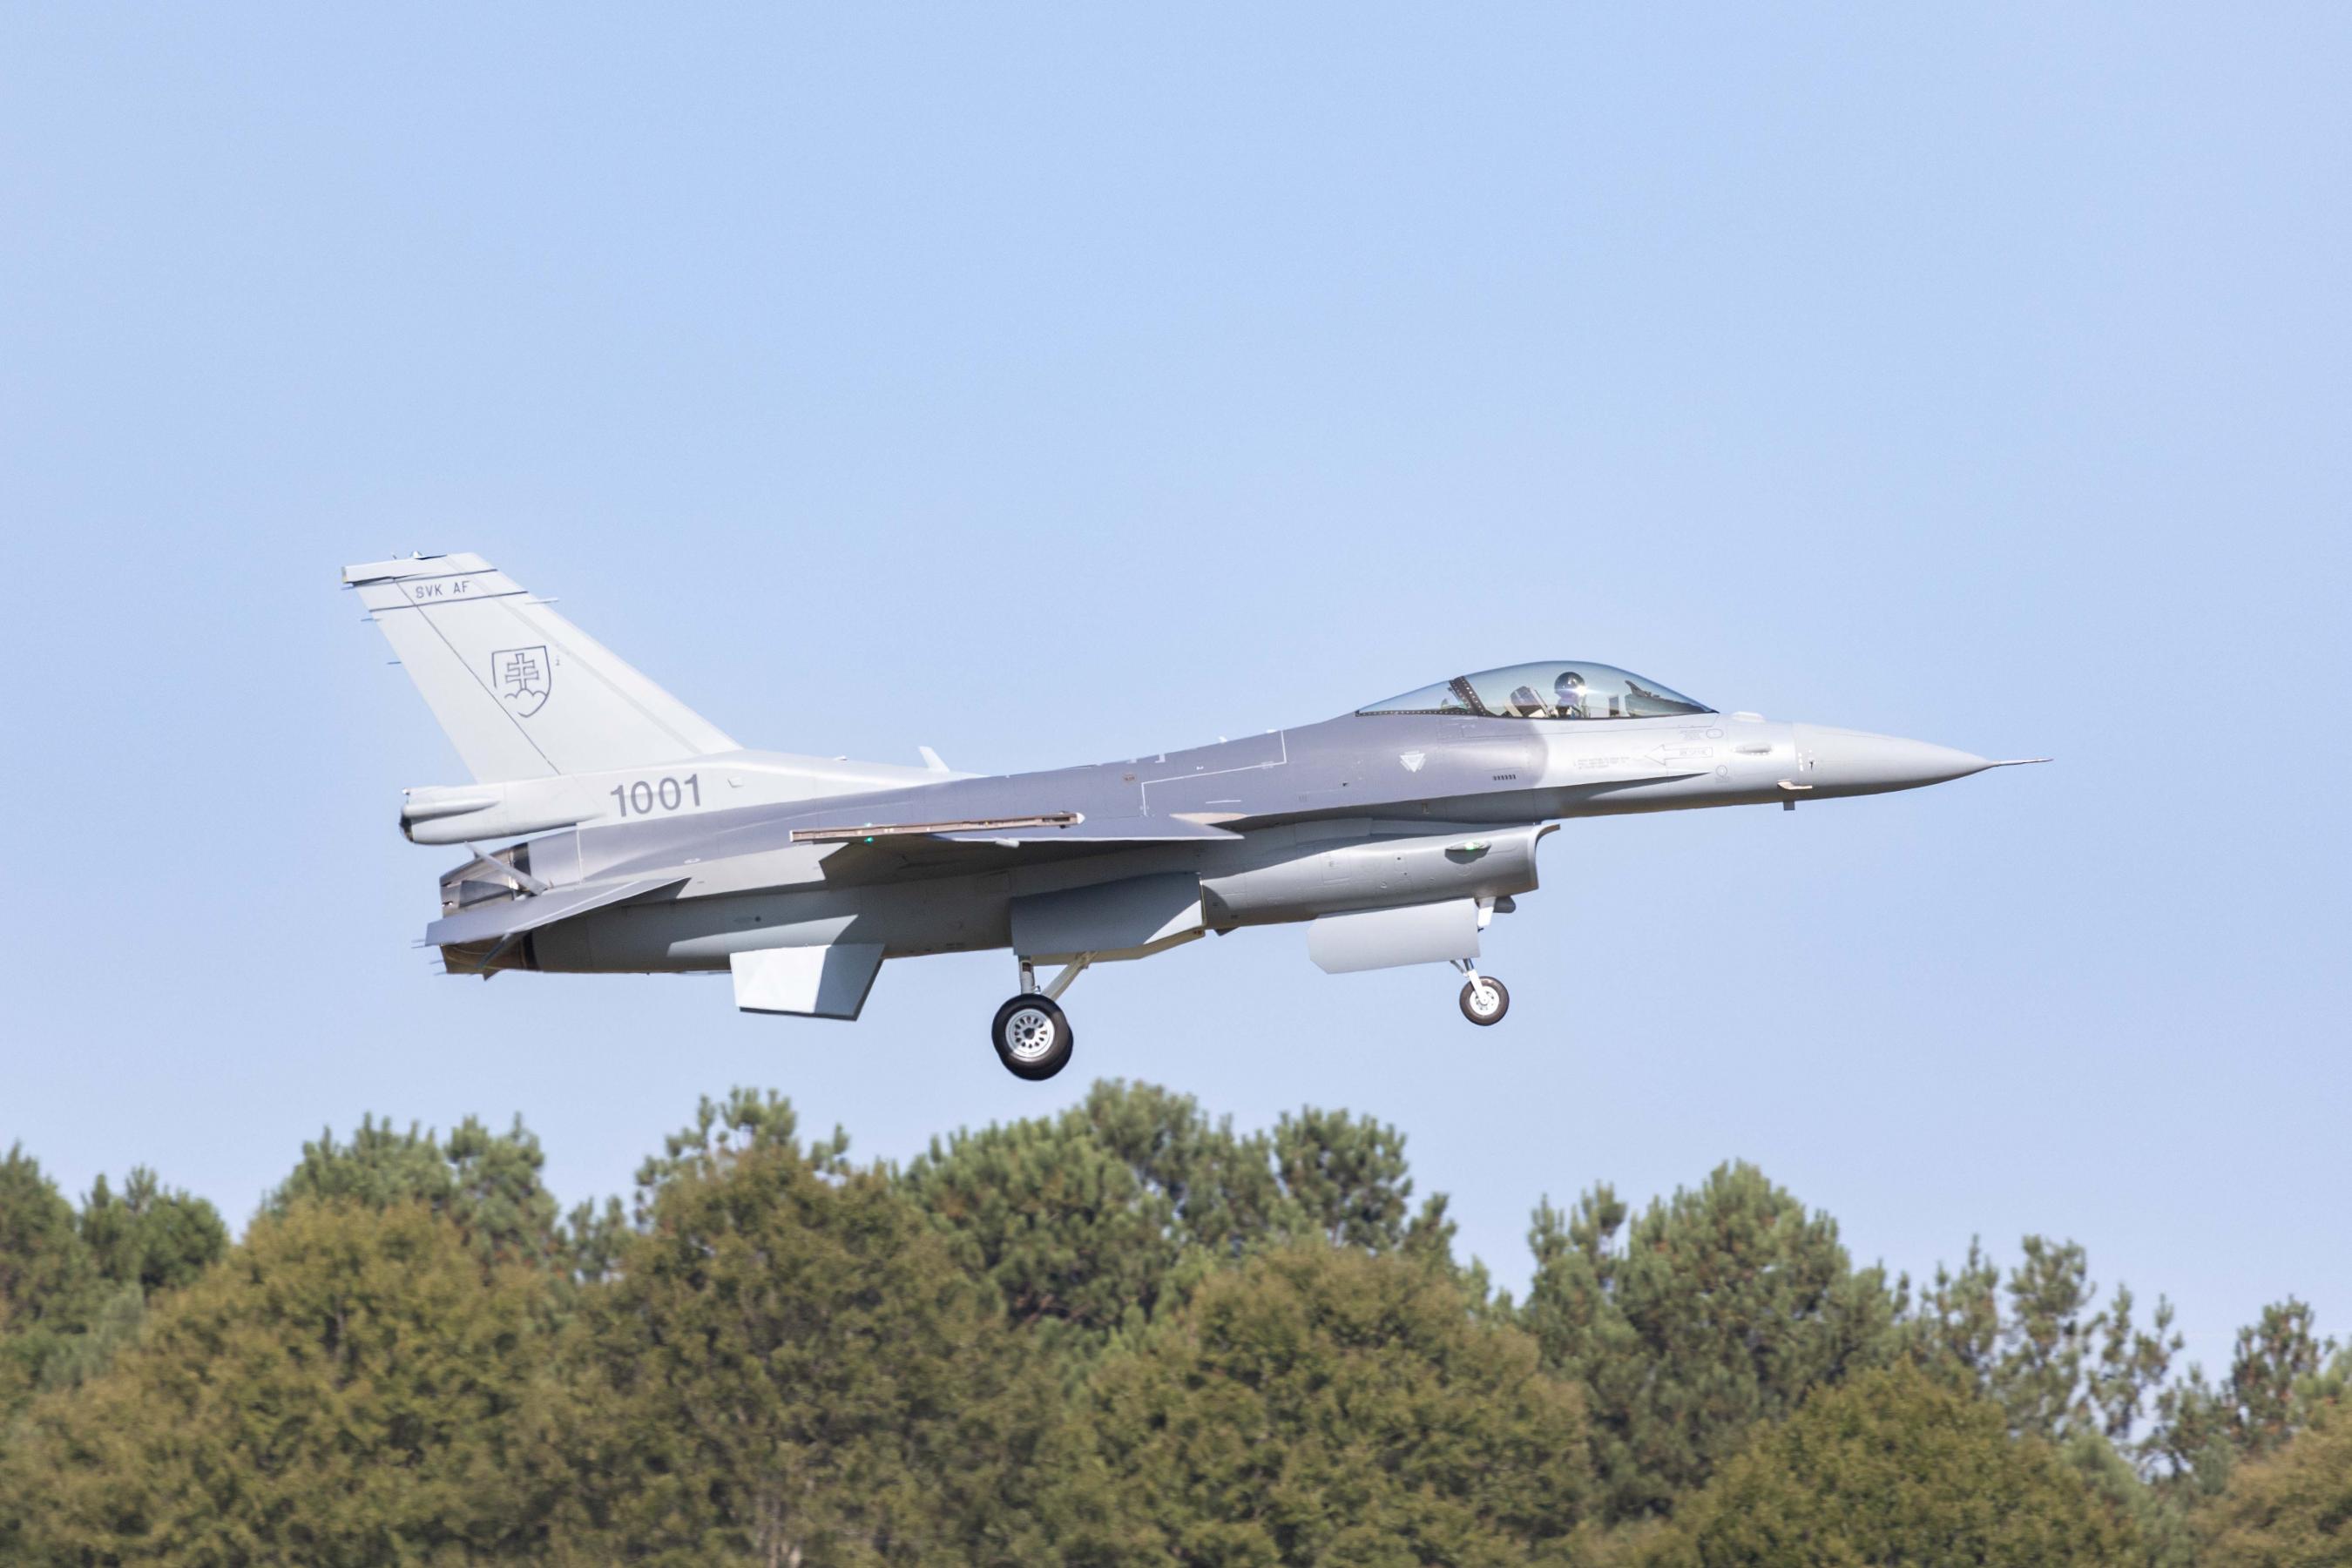 A modernised F-16V Block 70 fighter jet for the Slovak Air Force made its maiden flight in South Carolina